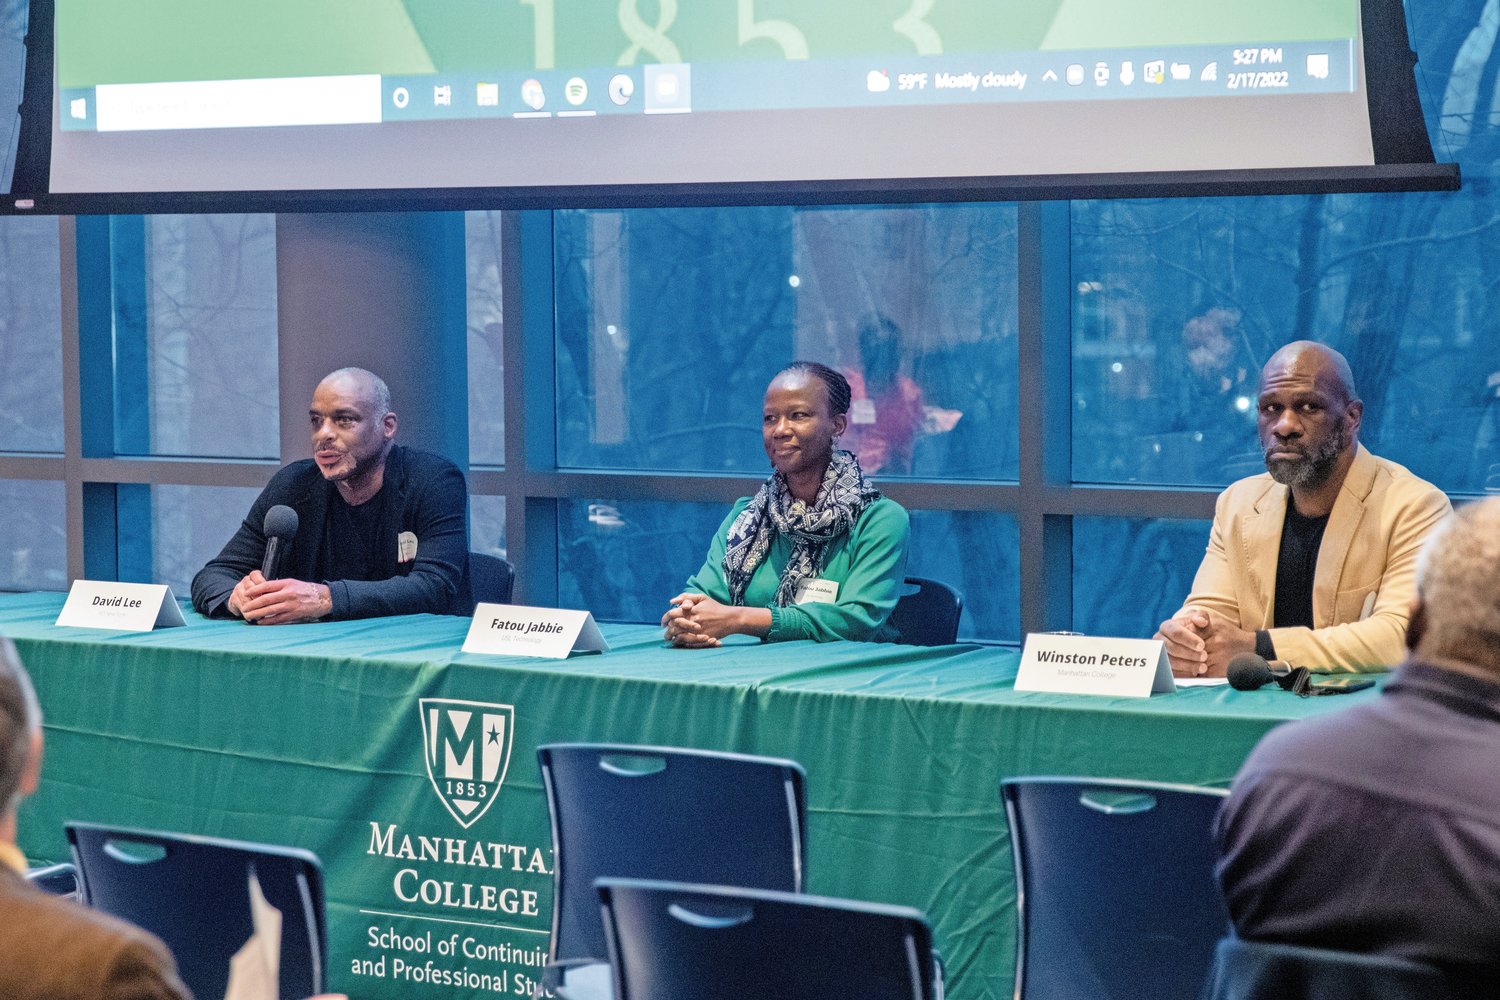 Business Entrepreneurs David Lee, left, Fatou Jabbie, middle, and Joel Mejia (not shown) joined a panel at the Kelly Commons building in Manhattan College recently to discuss their business in the Bronx and why they had an interest in the borough. Their similarities do not differ with moderator and Manhattan College professor Winston Peters, right.